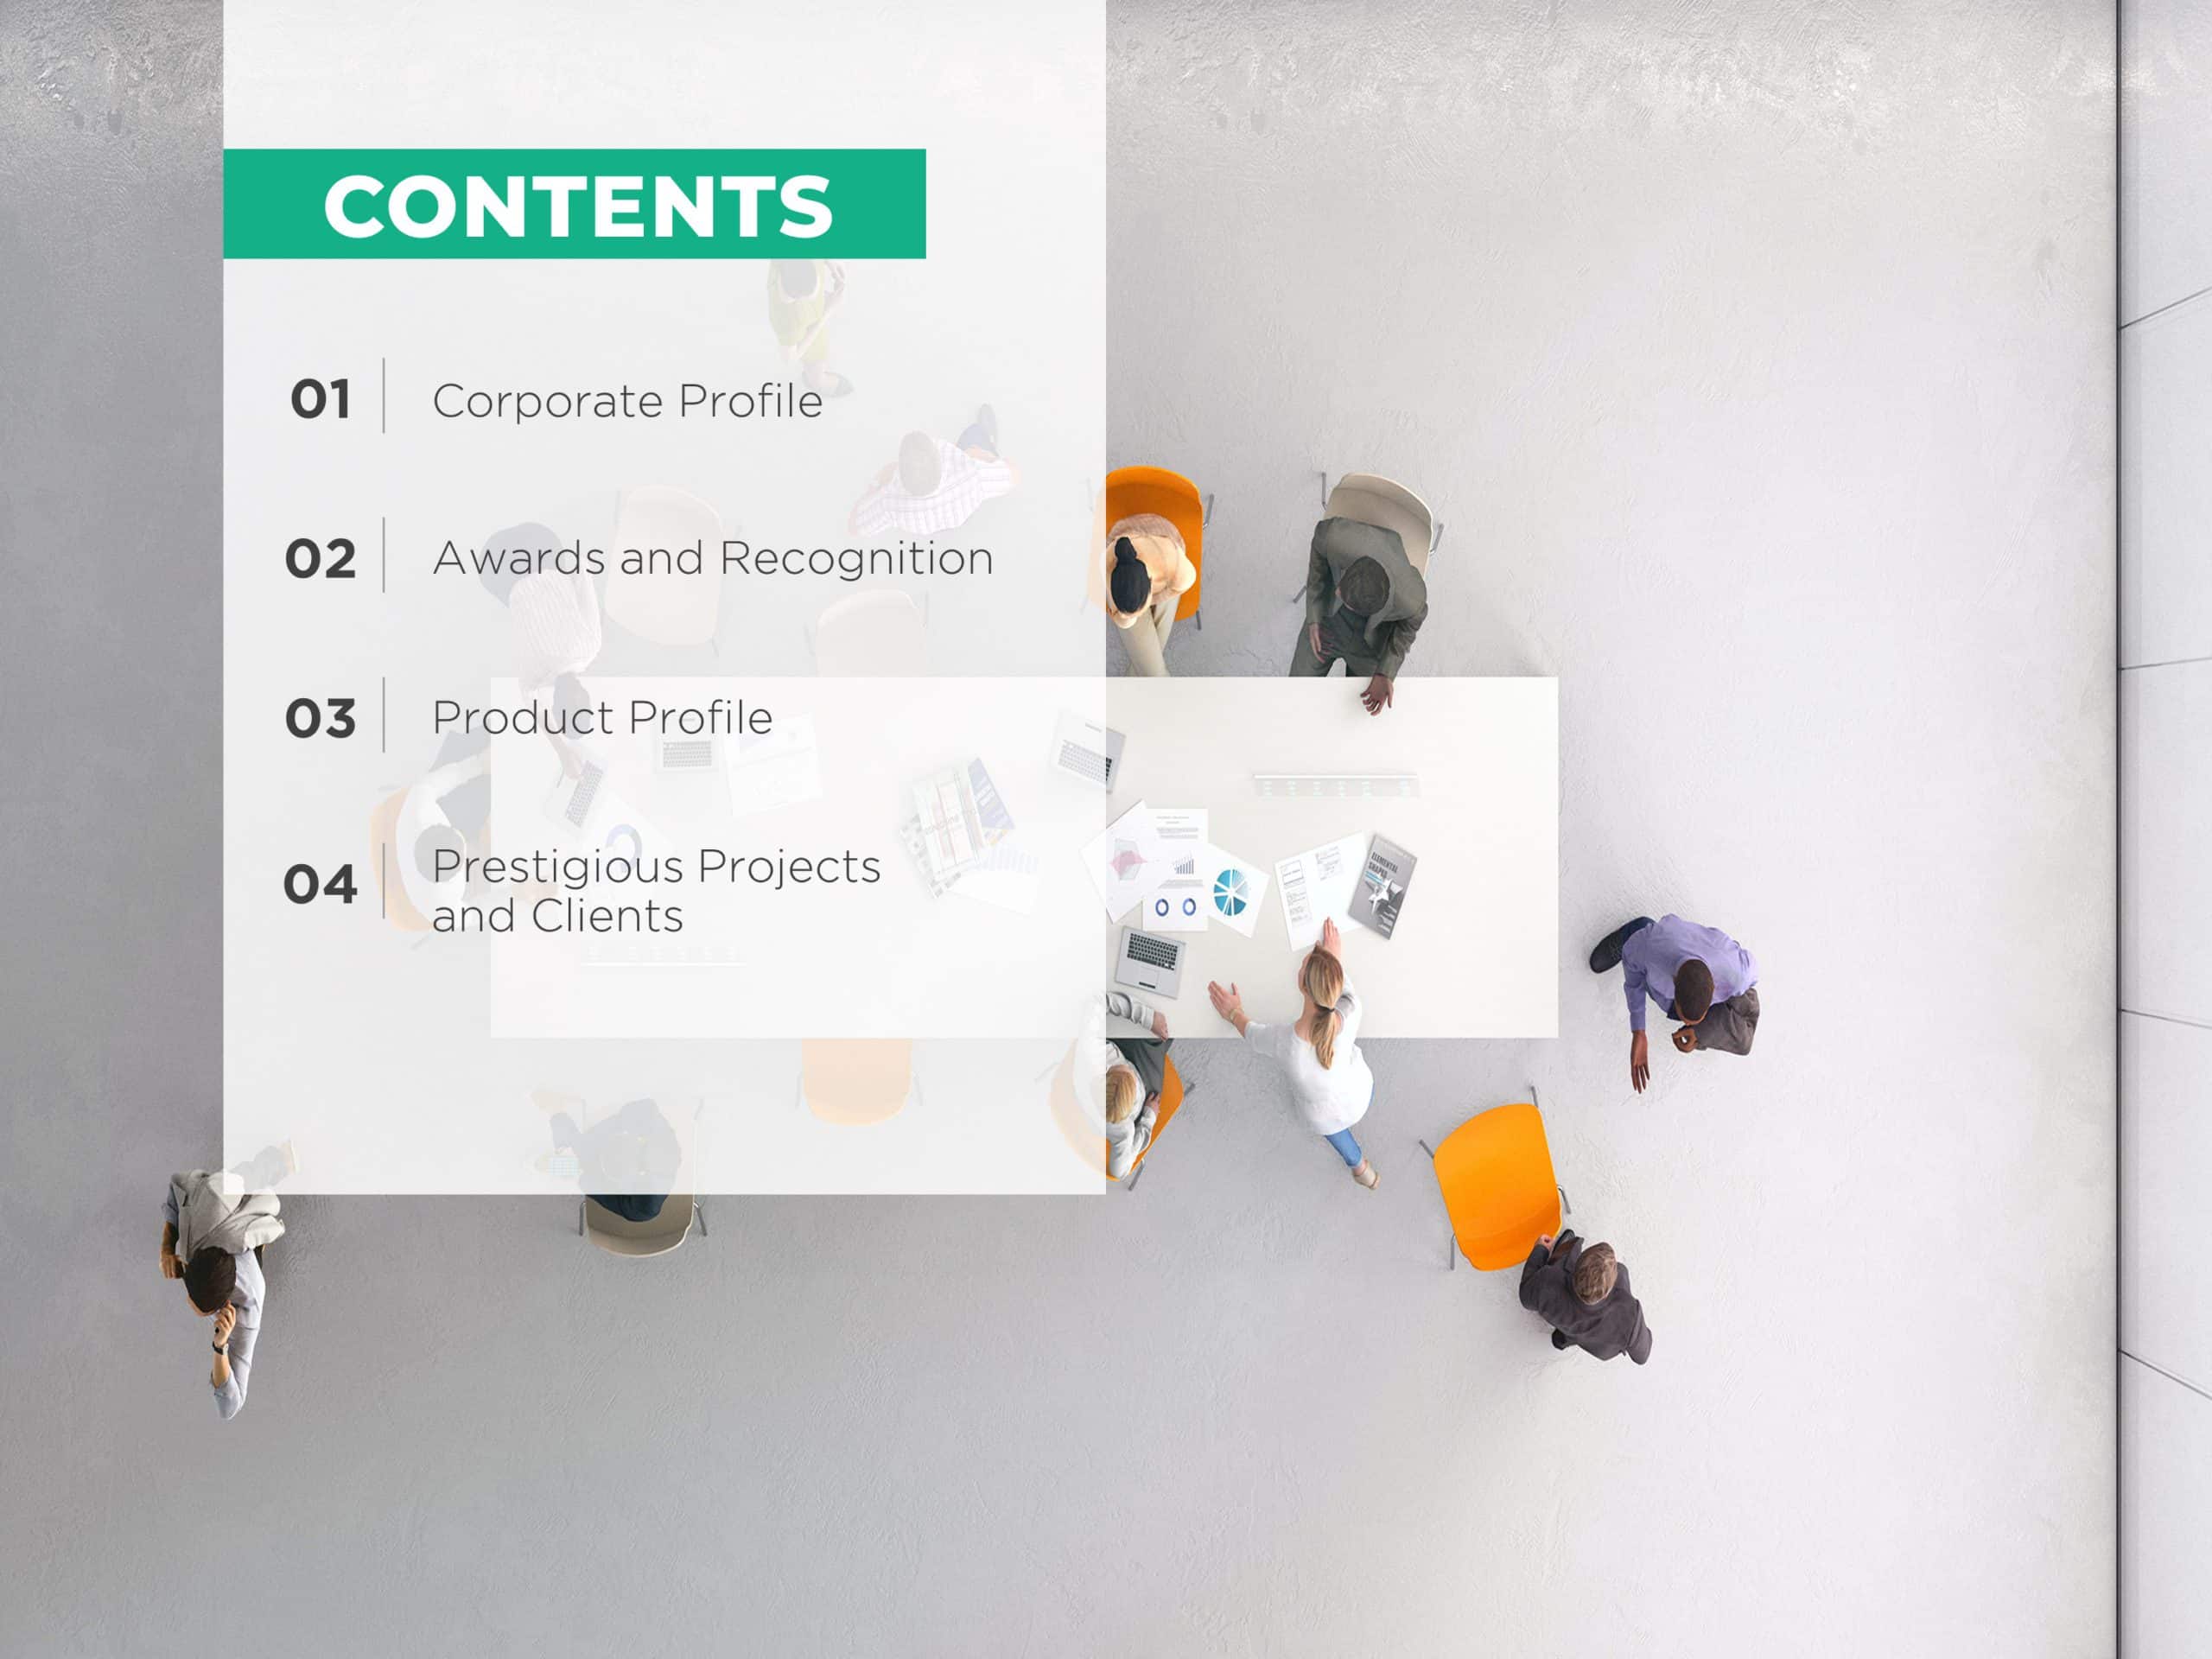 Table of Contents PPT Template